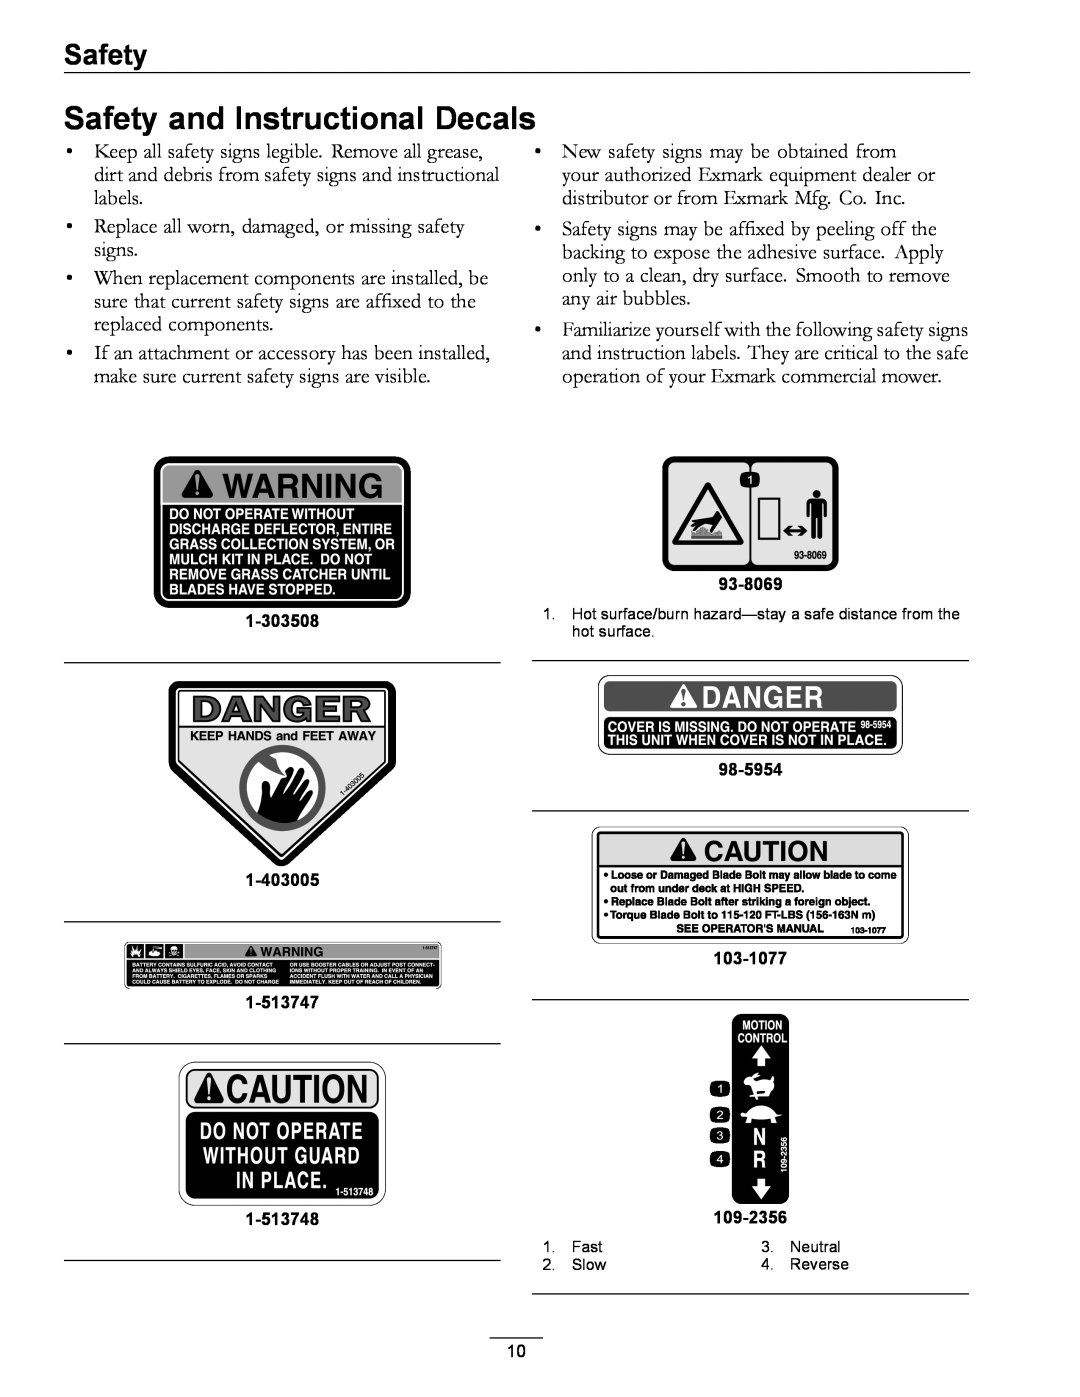 Exmark Phazer manual Safety and Instructional Decals 